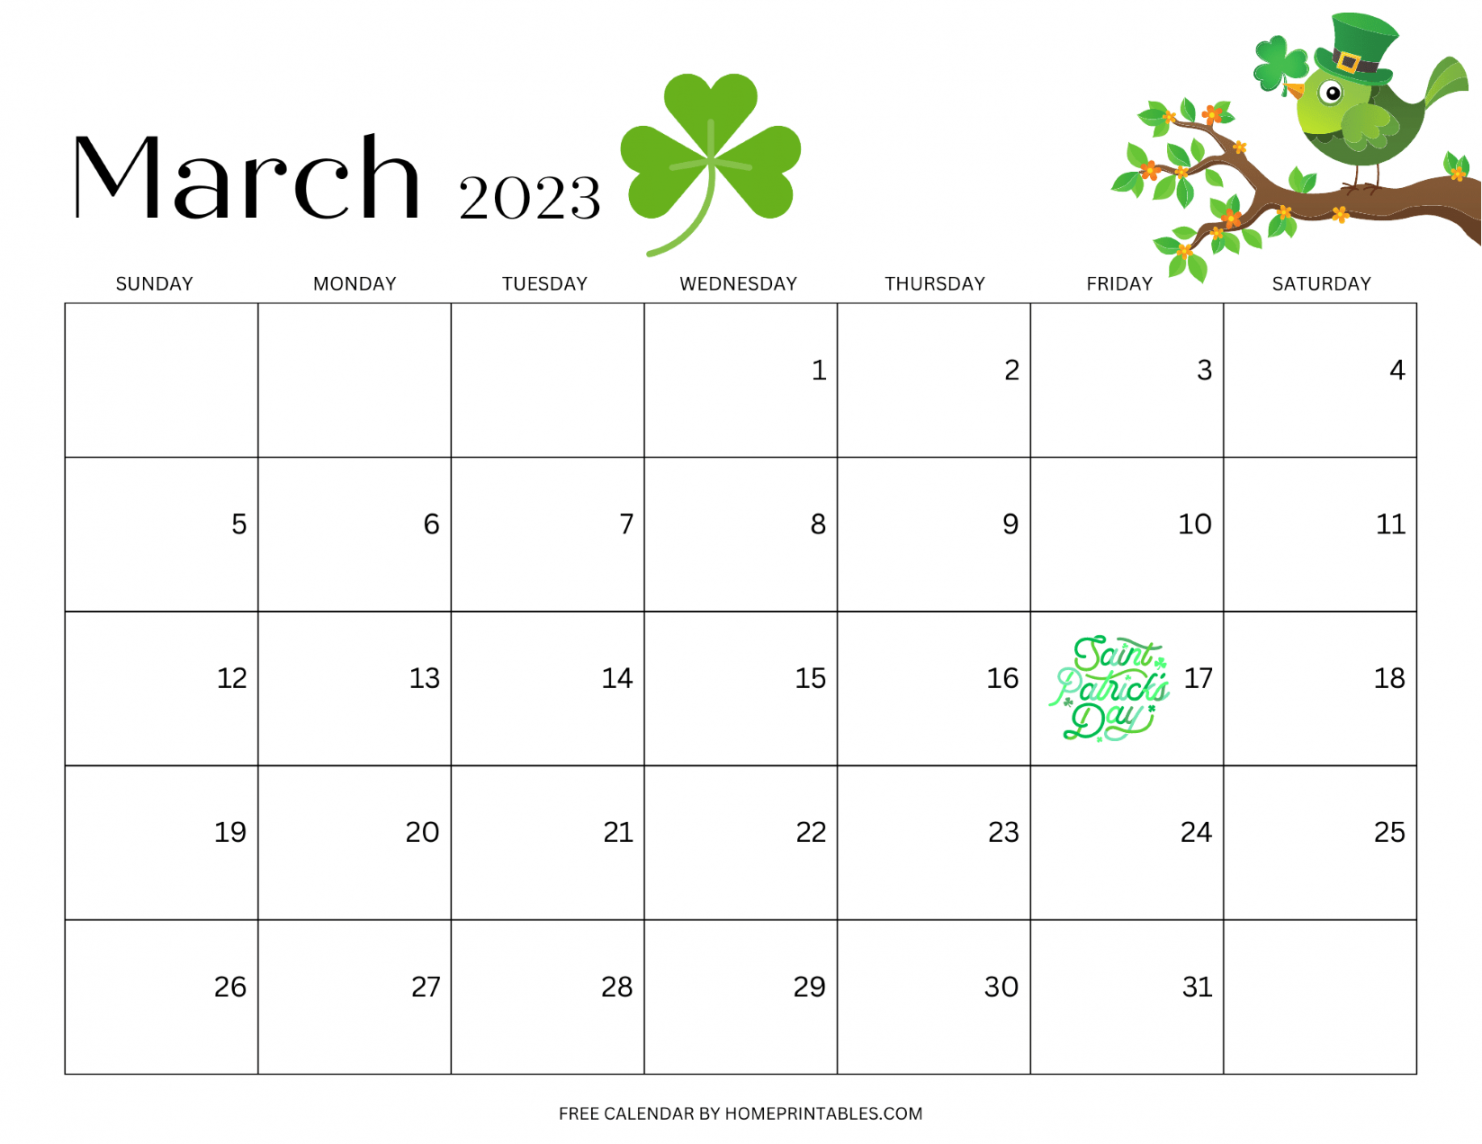 March  Calendar Templates - Free Download!